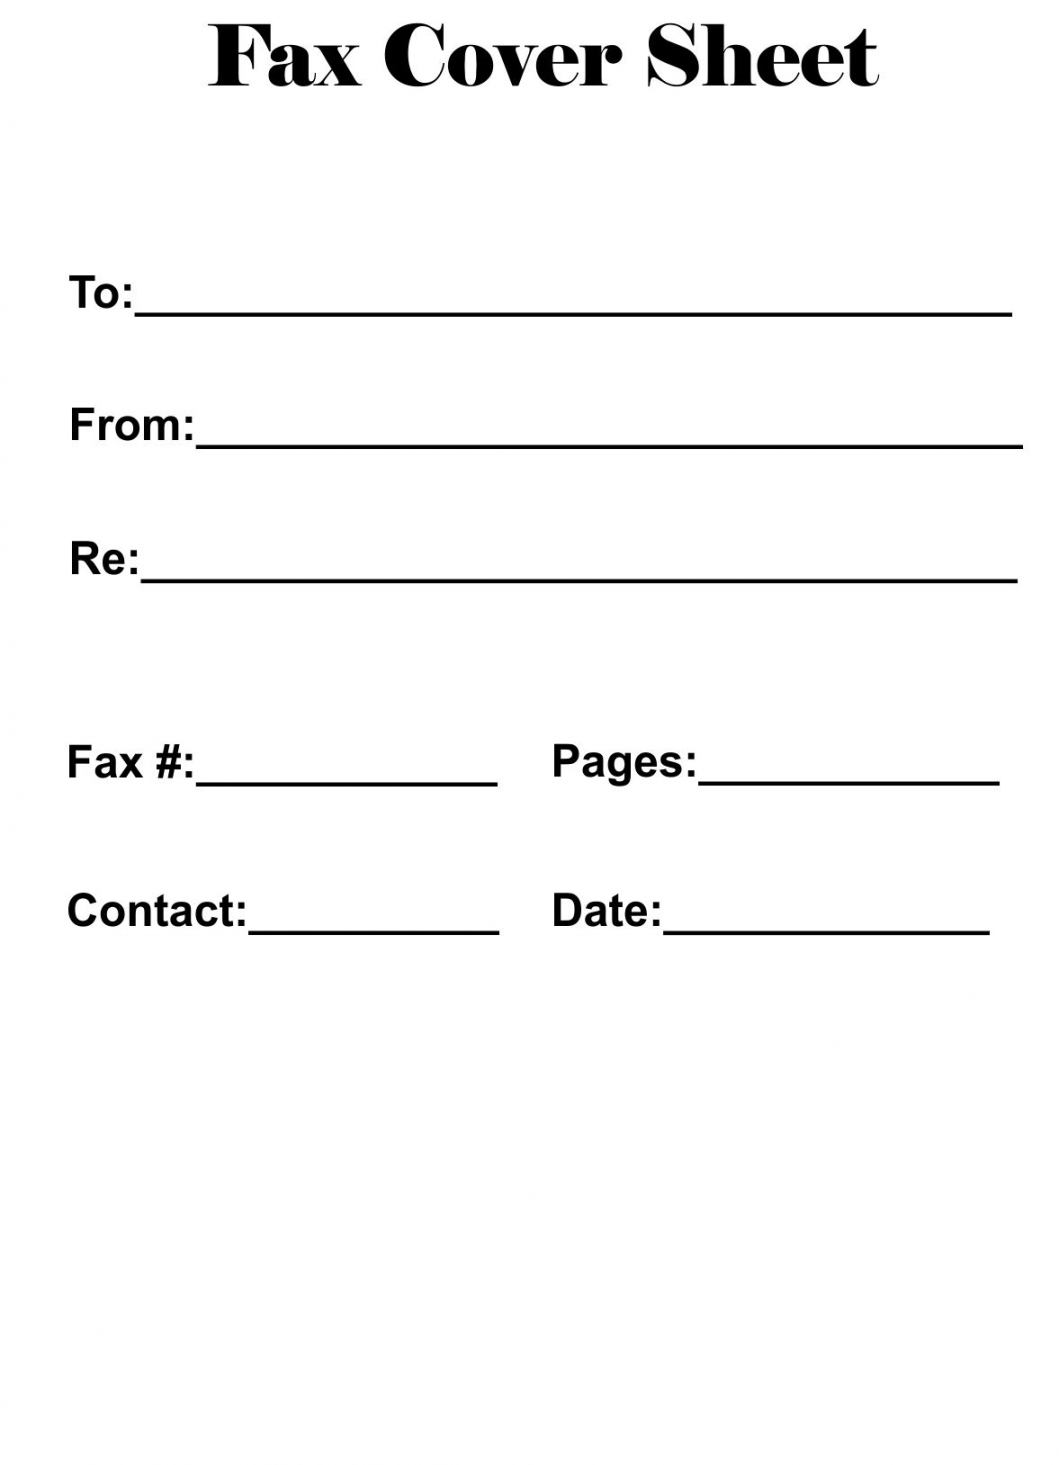 Fax Cover Sheet Free Printable - Printable - Fancy Fax Cover Sheet Template  Fax cover sheet, Cover sheet